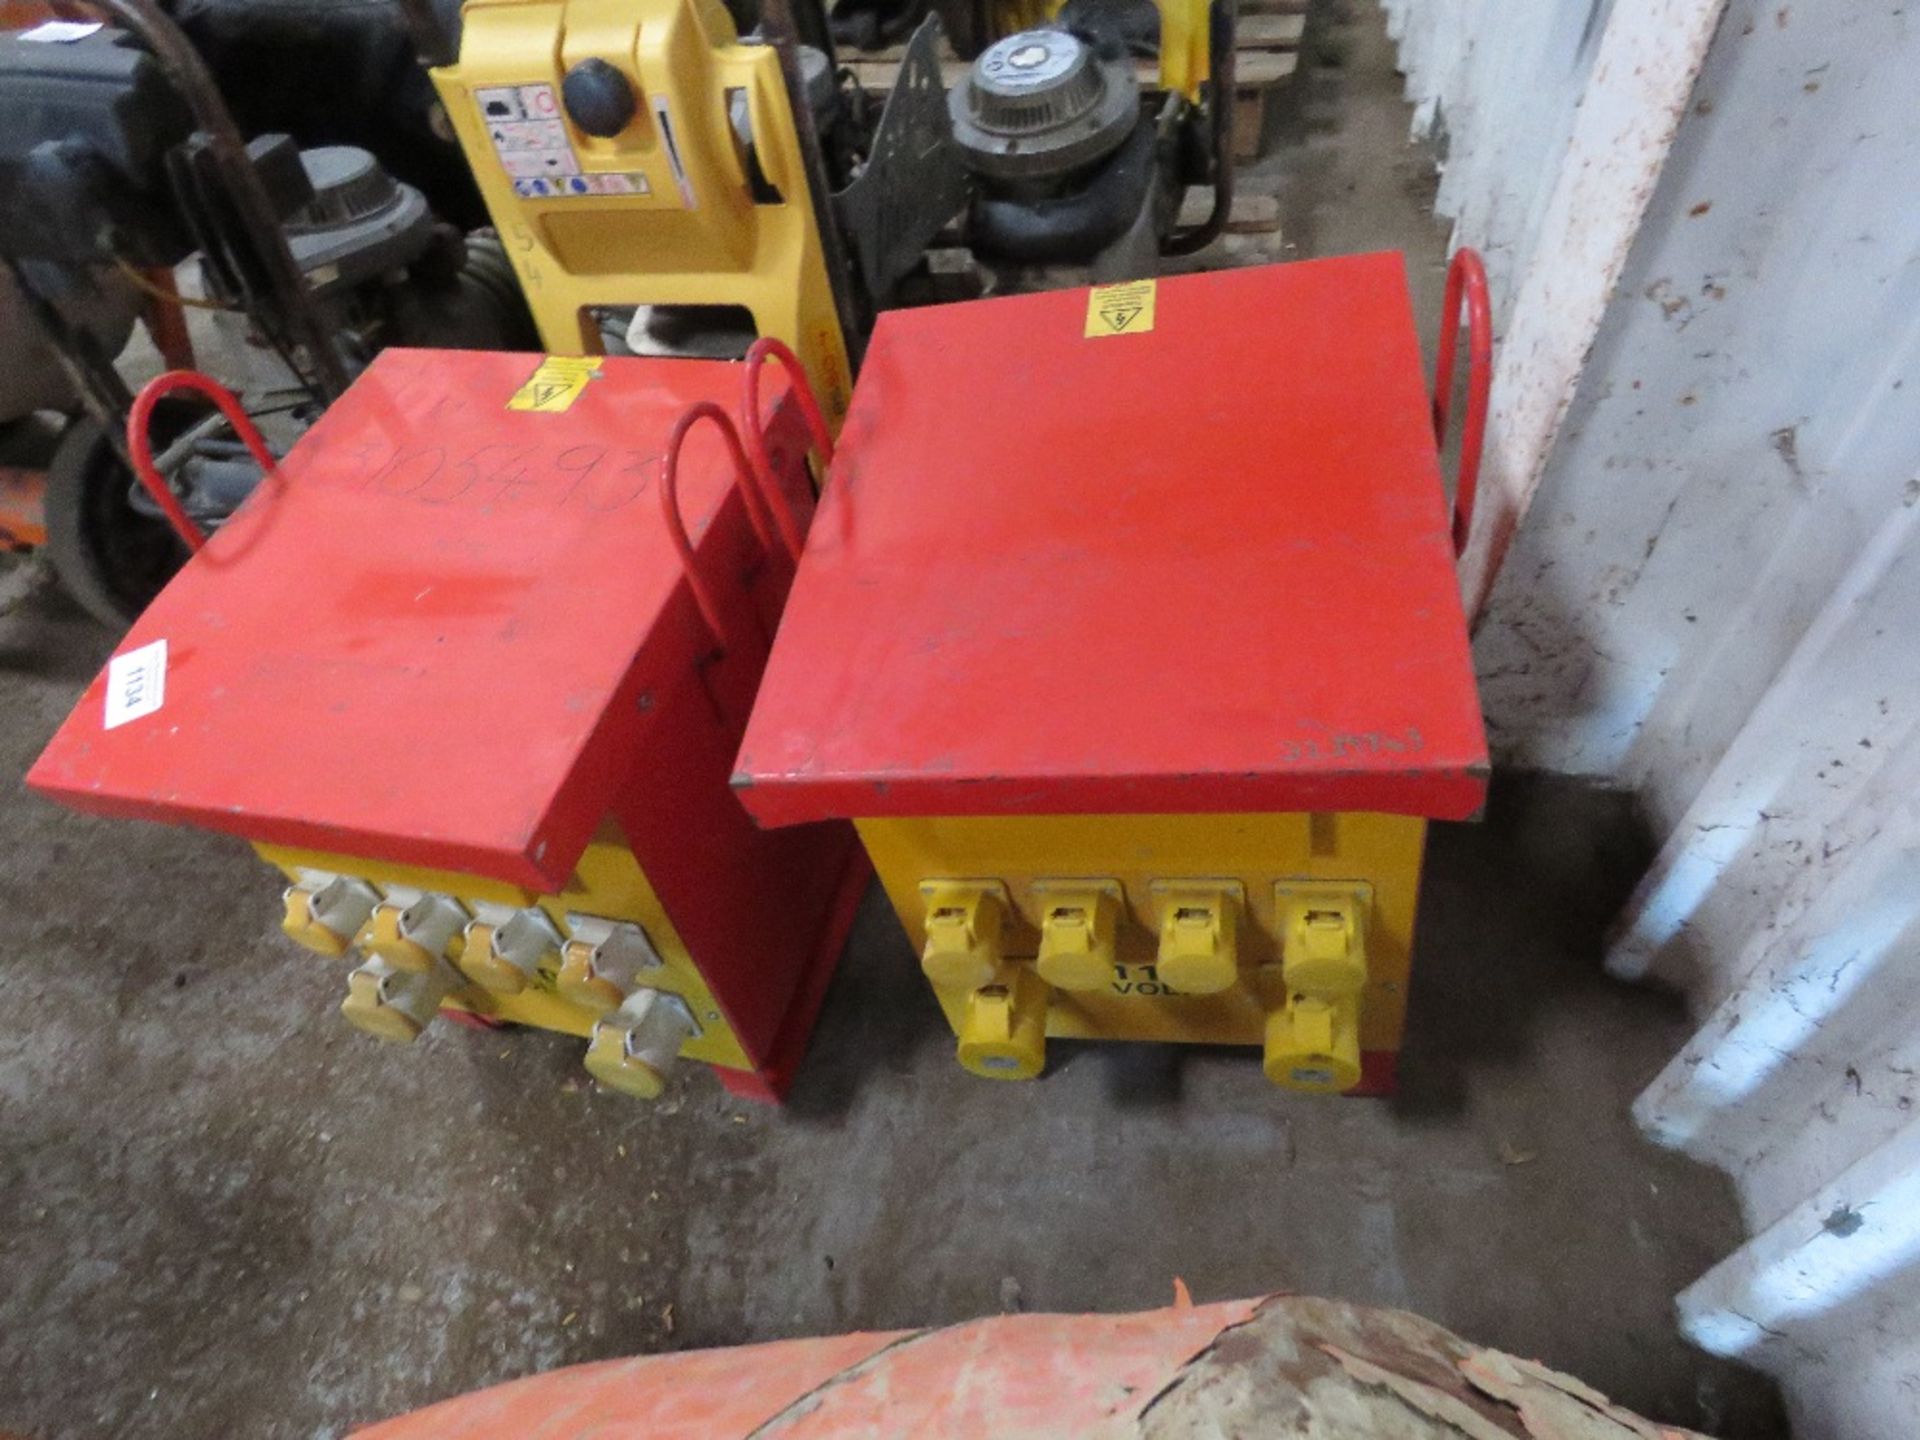 2 X 10KVA RATED SITE TRANSFORMERS. All items "sold as seen" or "sold as is" with no warranty given - Image 2 of 2